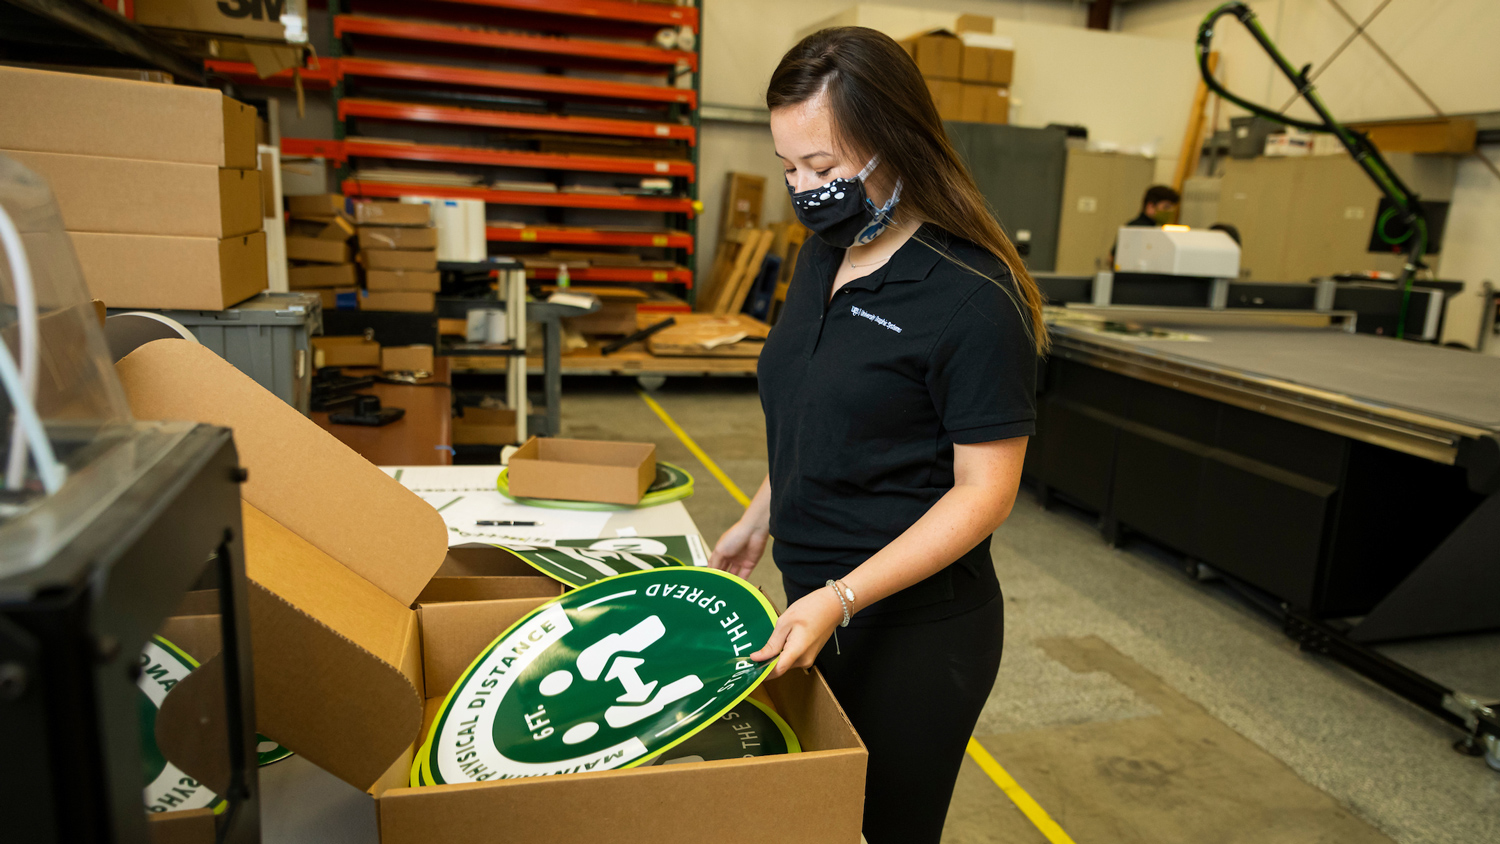 A woman wearing a mask puts a green sign into a cardboard box